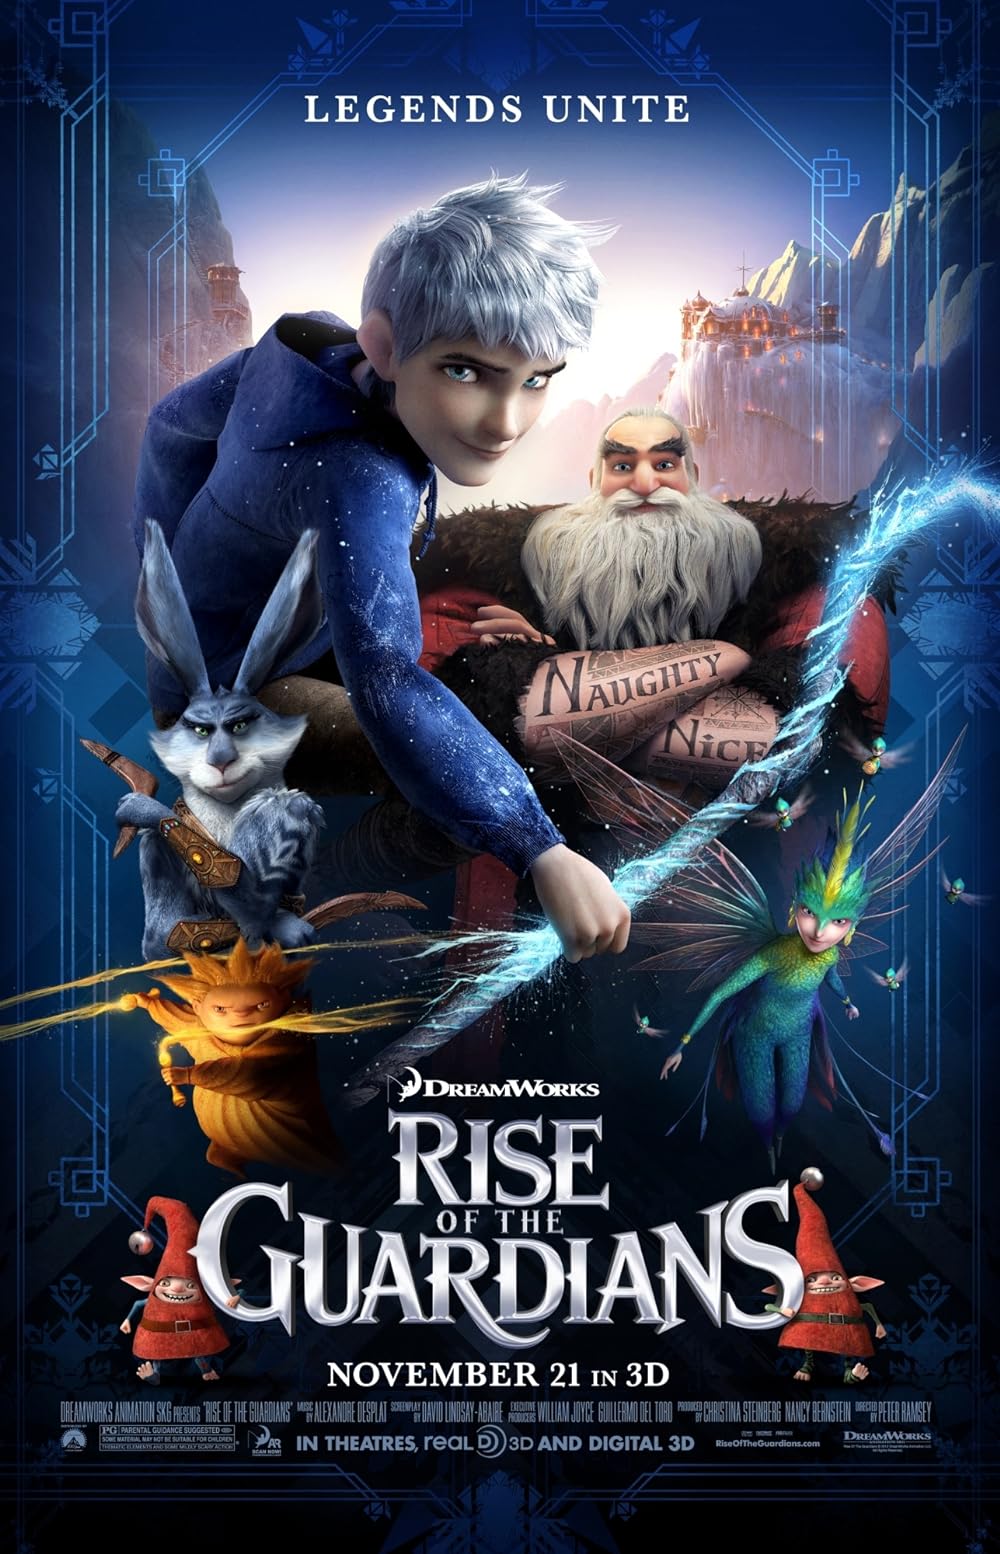 FULL MOVIE: Rise of the Guardians (2011)